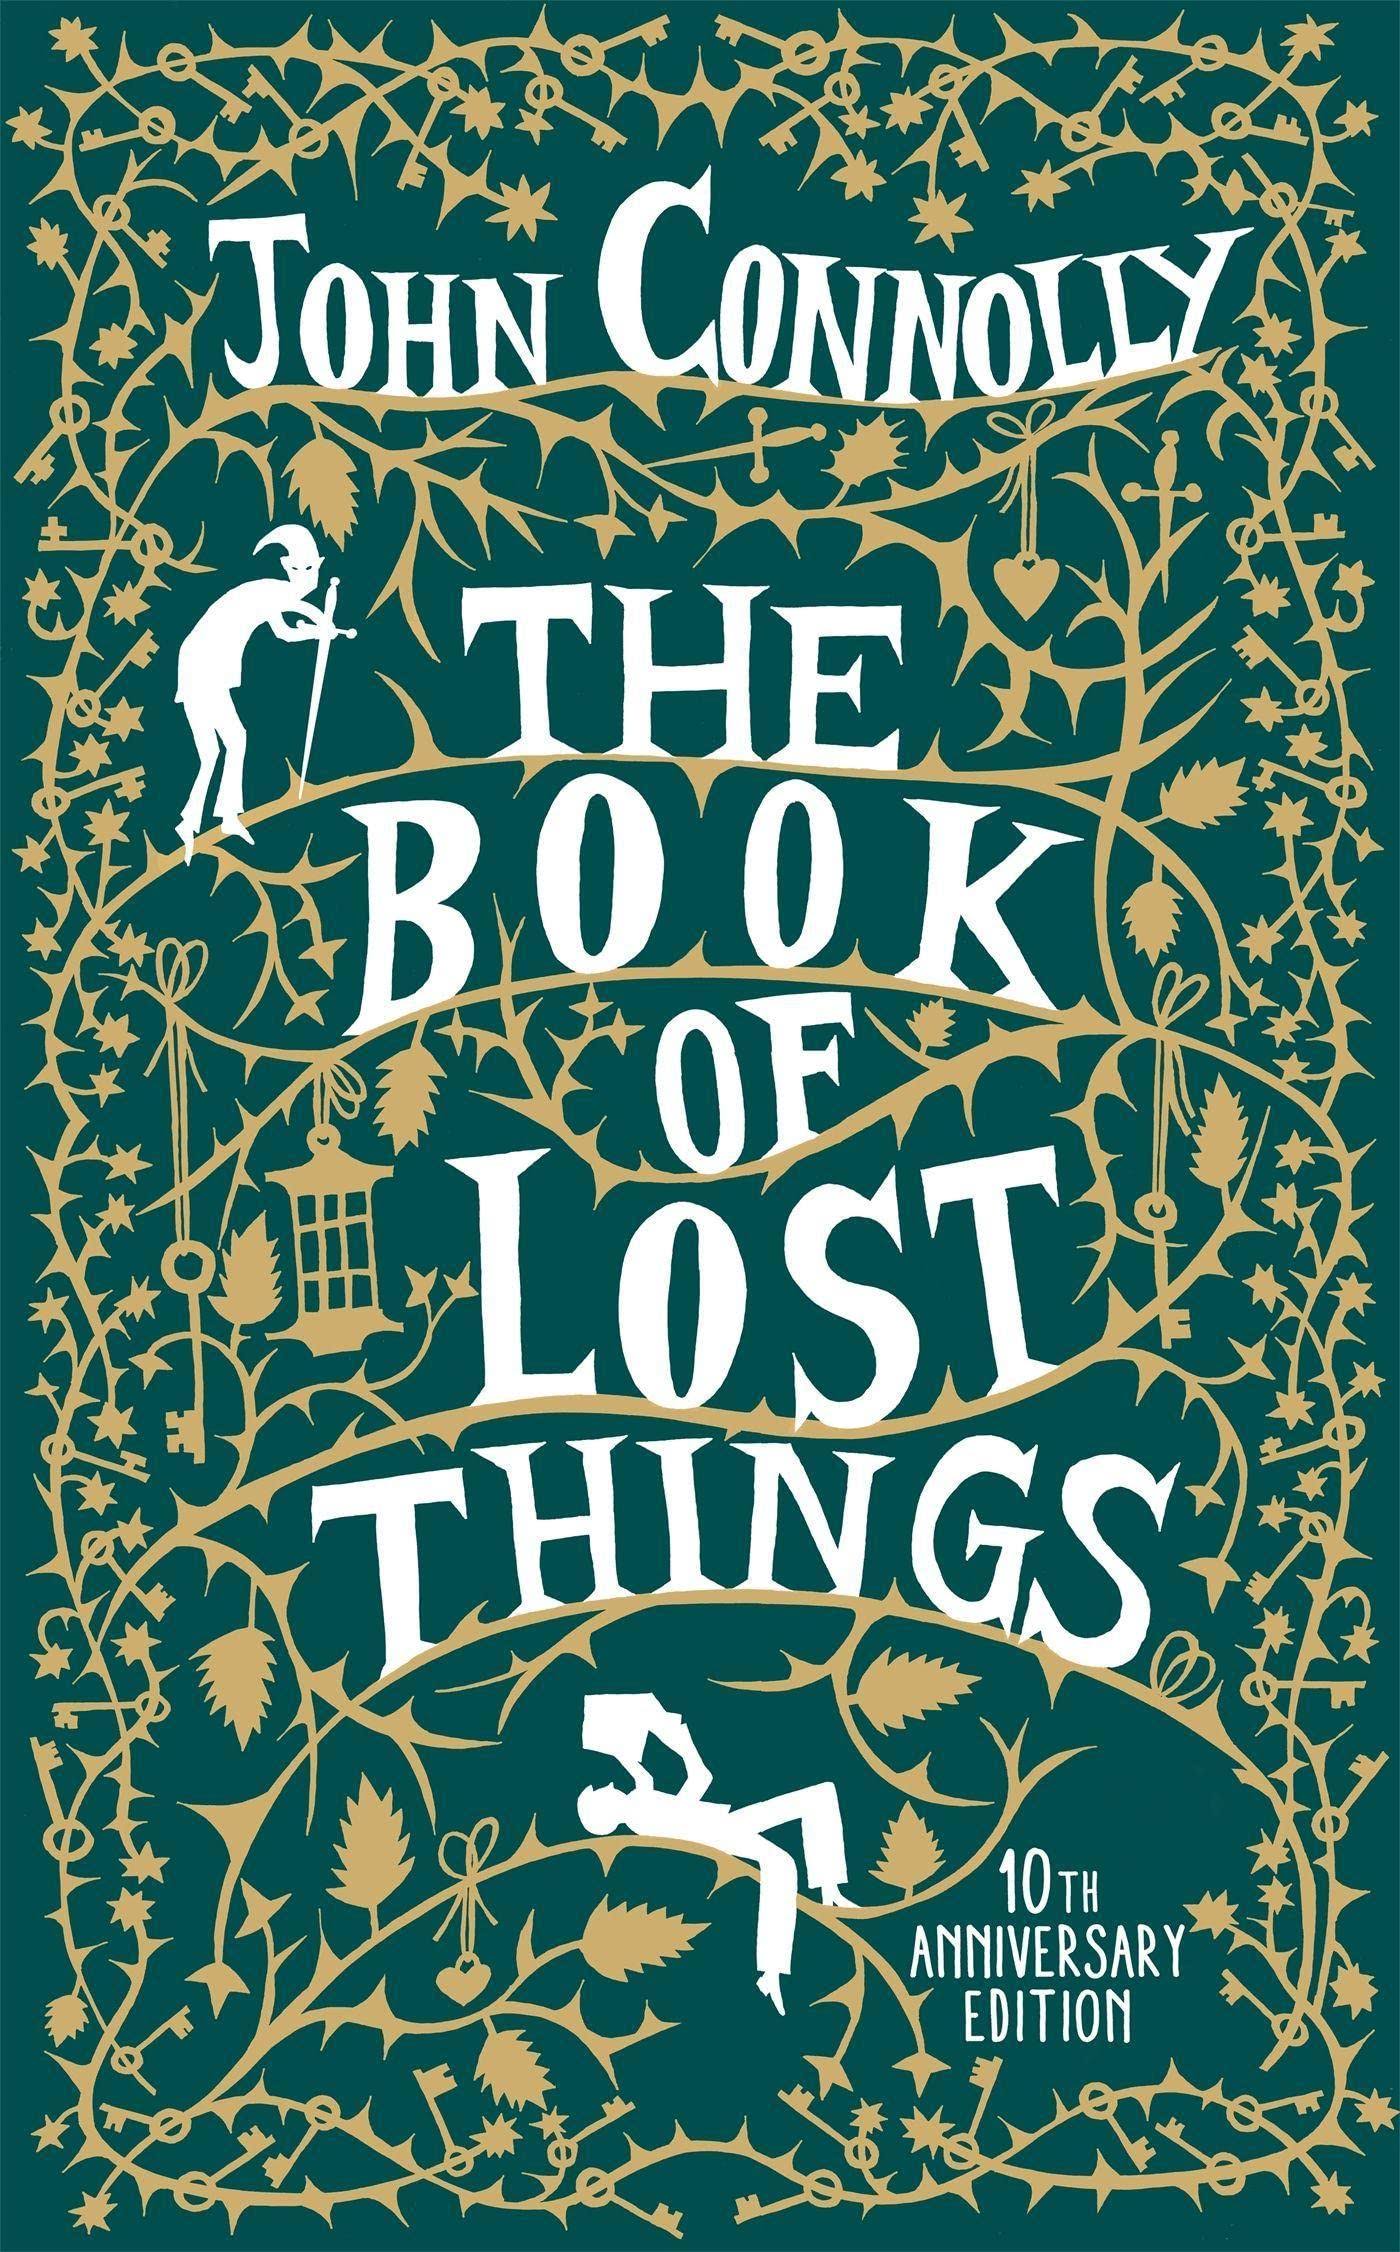 The Book of Lost Things - John Connolly